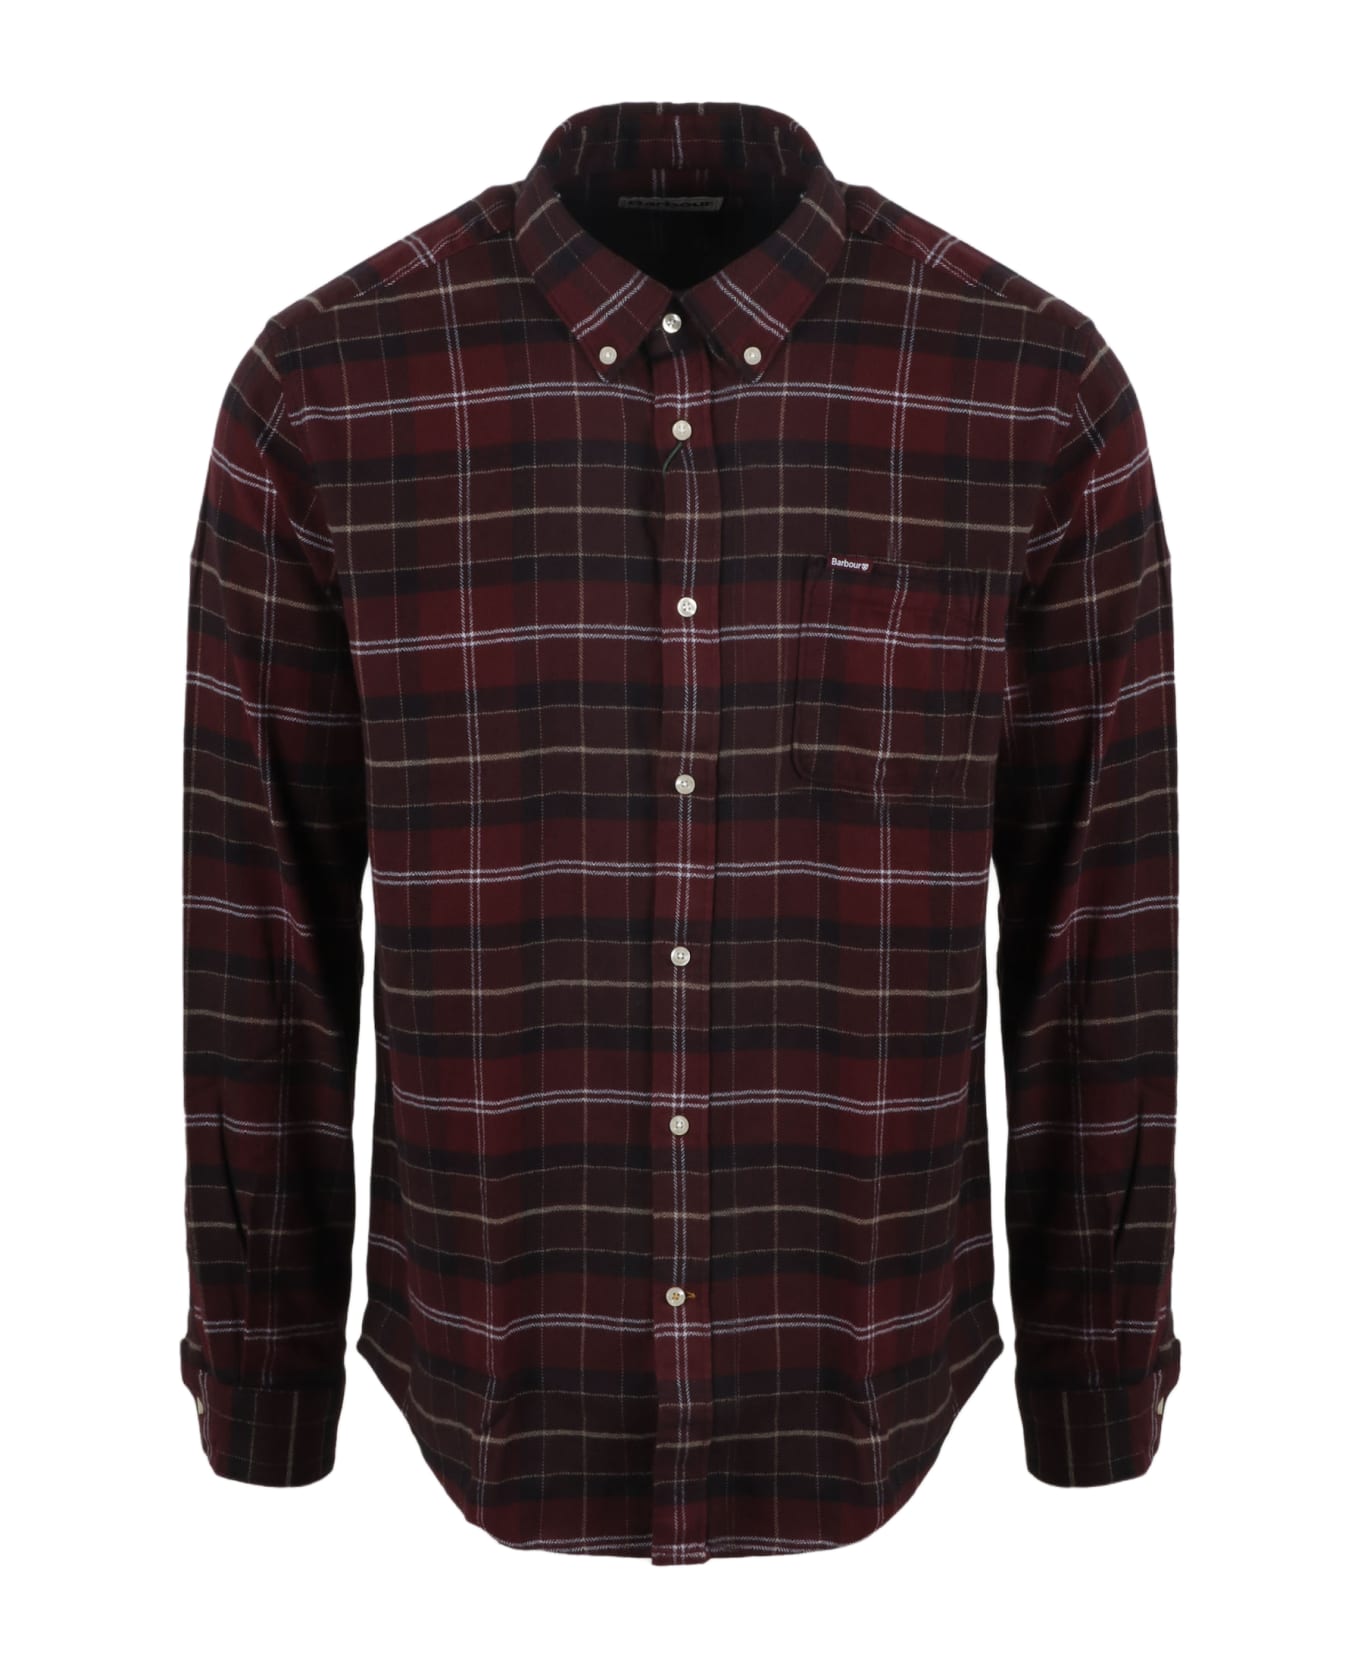 Barbour Kyeloch Shirt - Red